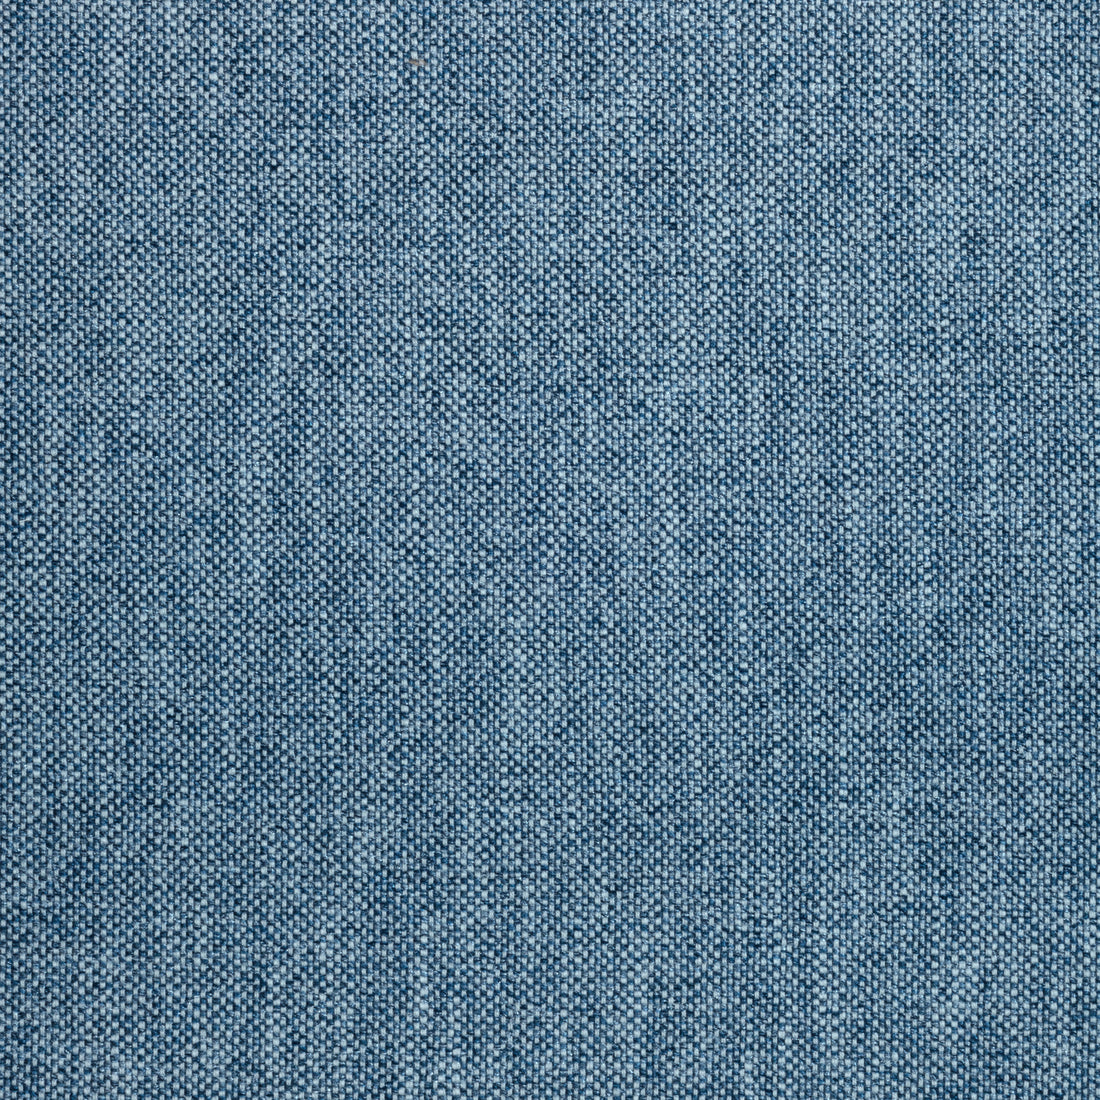 Wellfleet fabric in denim color - pattern number W73426 - by Thibaut in the Landmark Textures collection